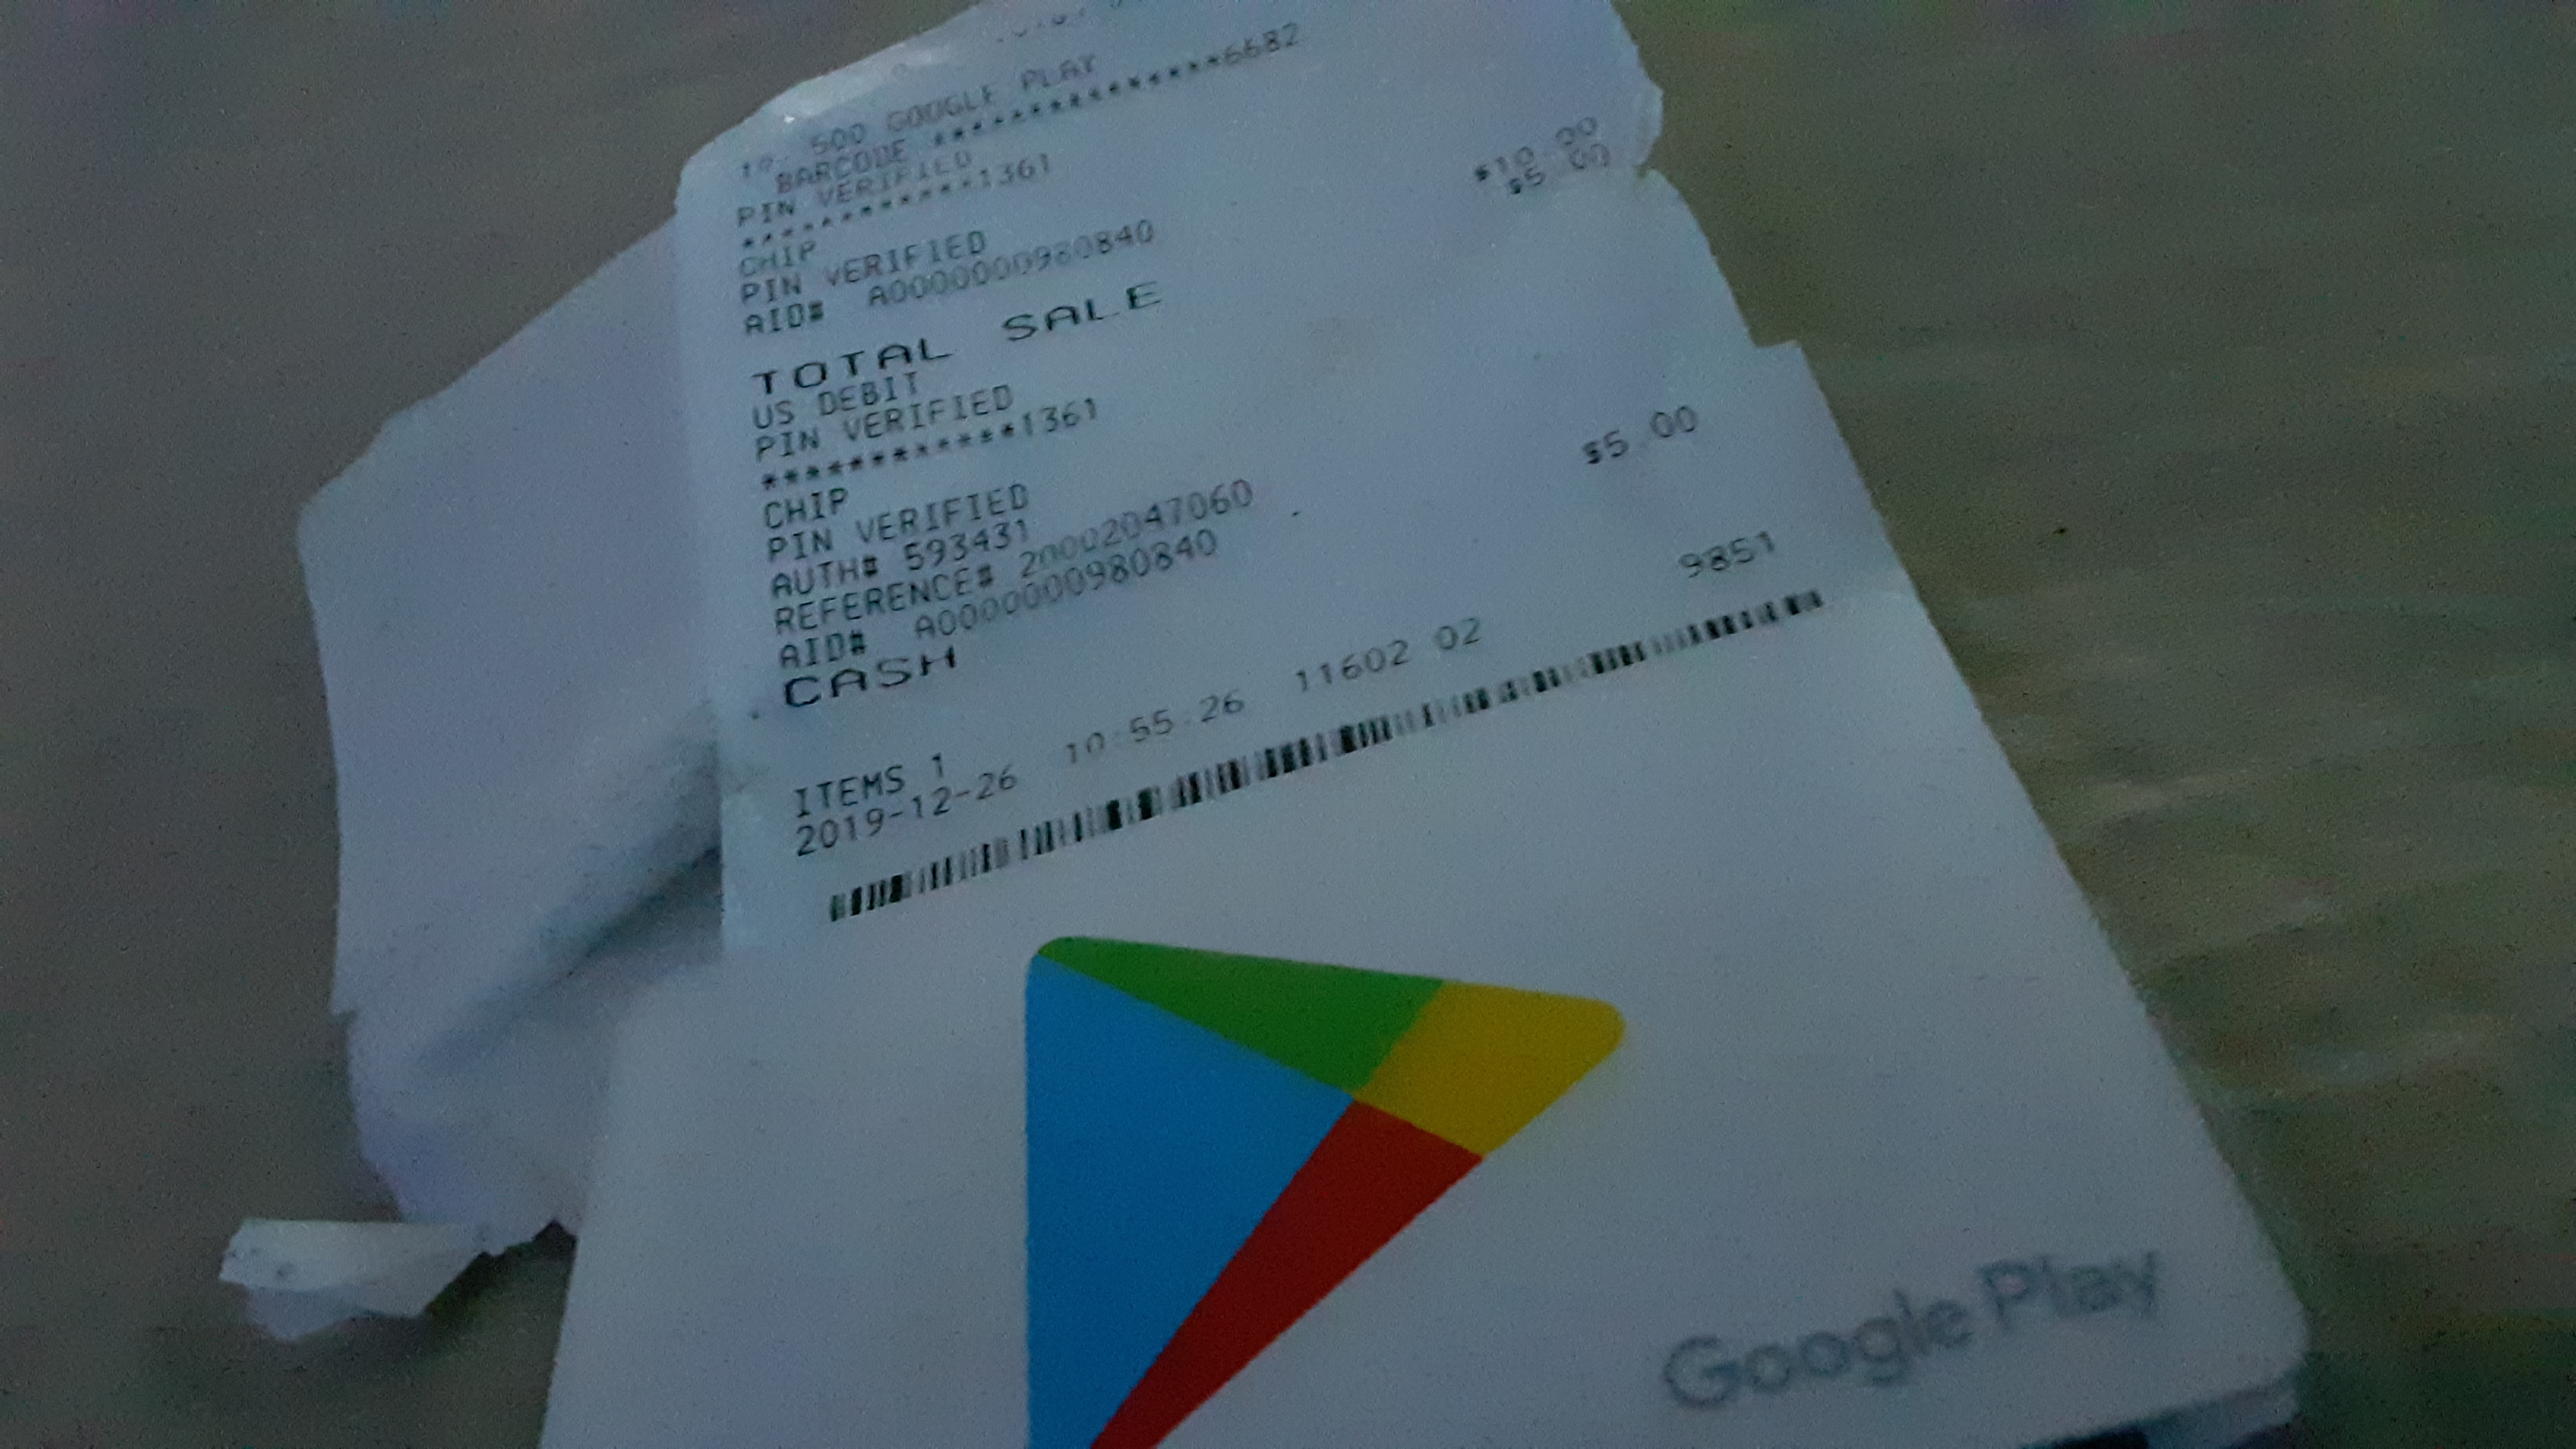 Different Pictures Of Google Play Gift Cards And How To Identify